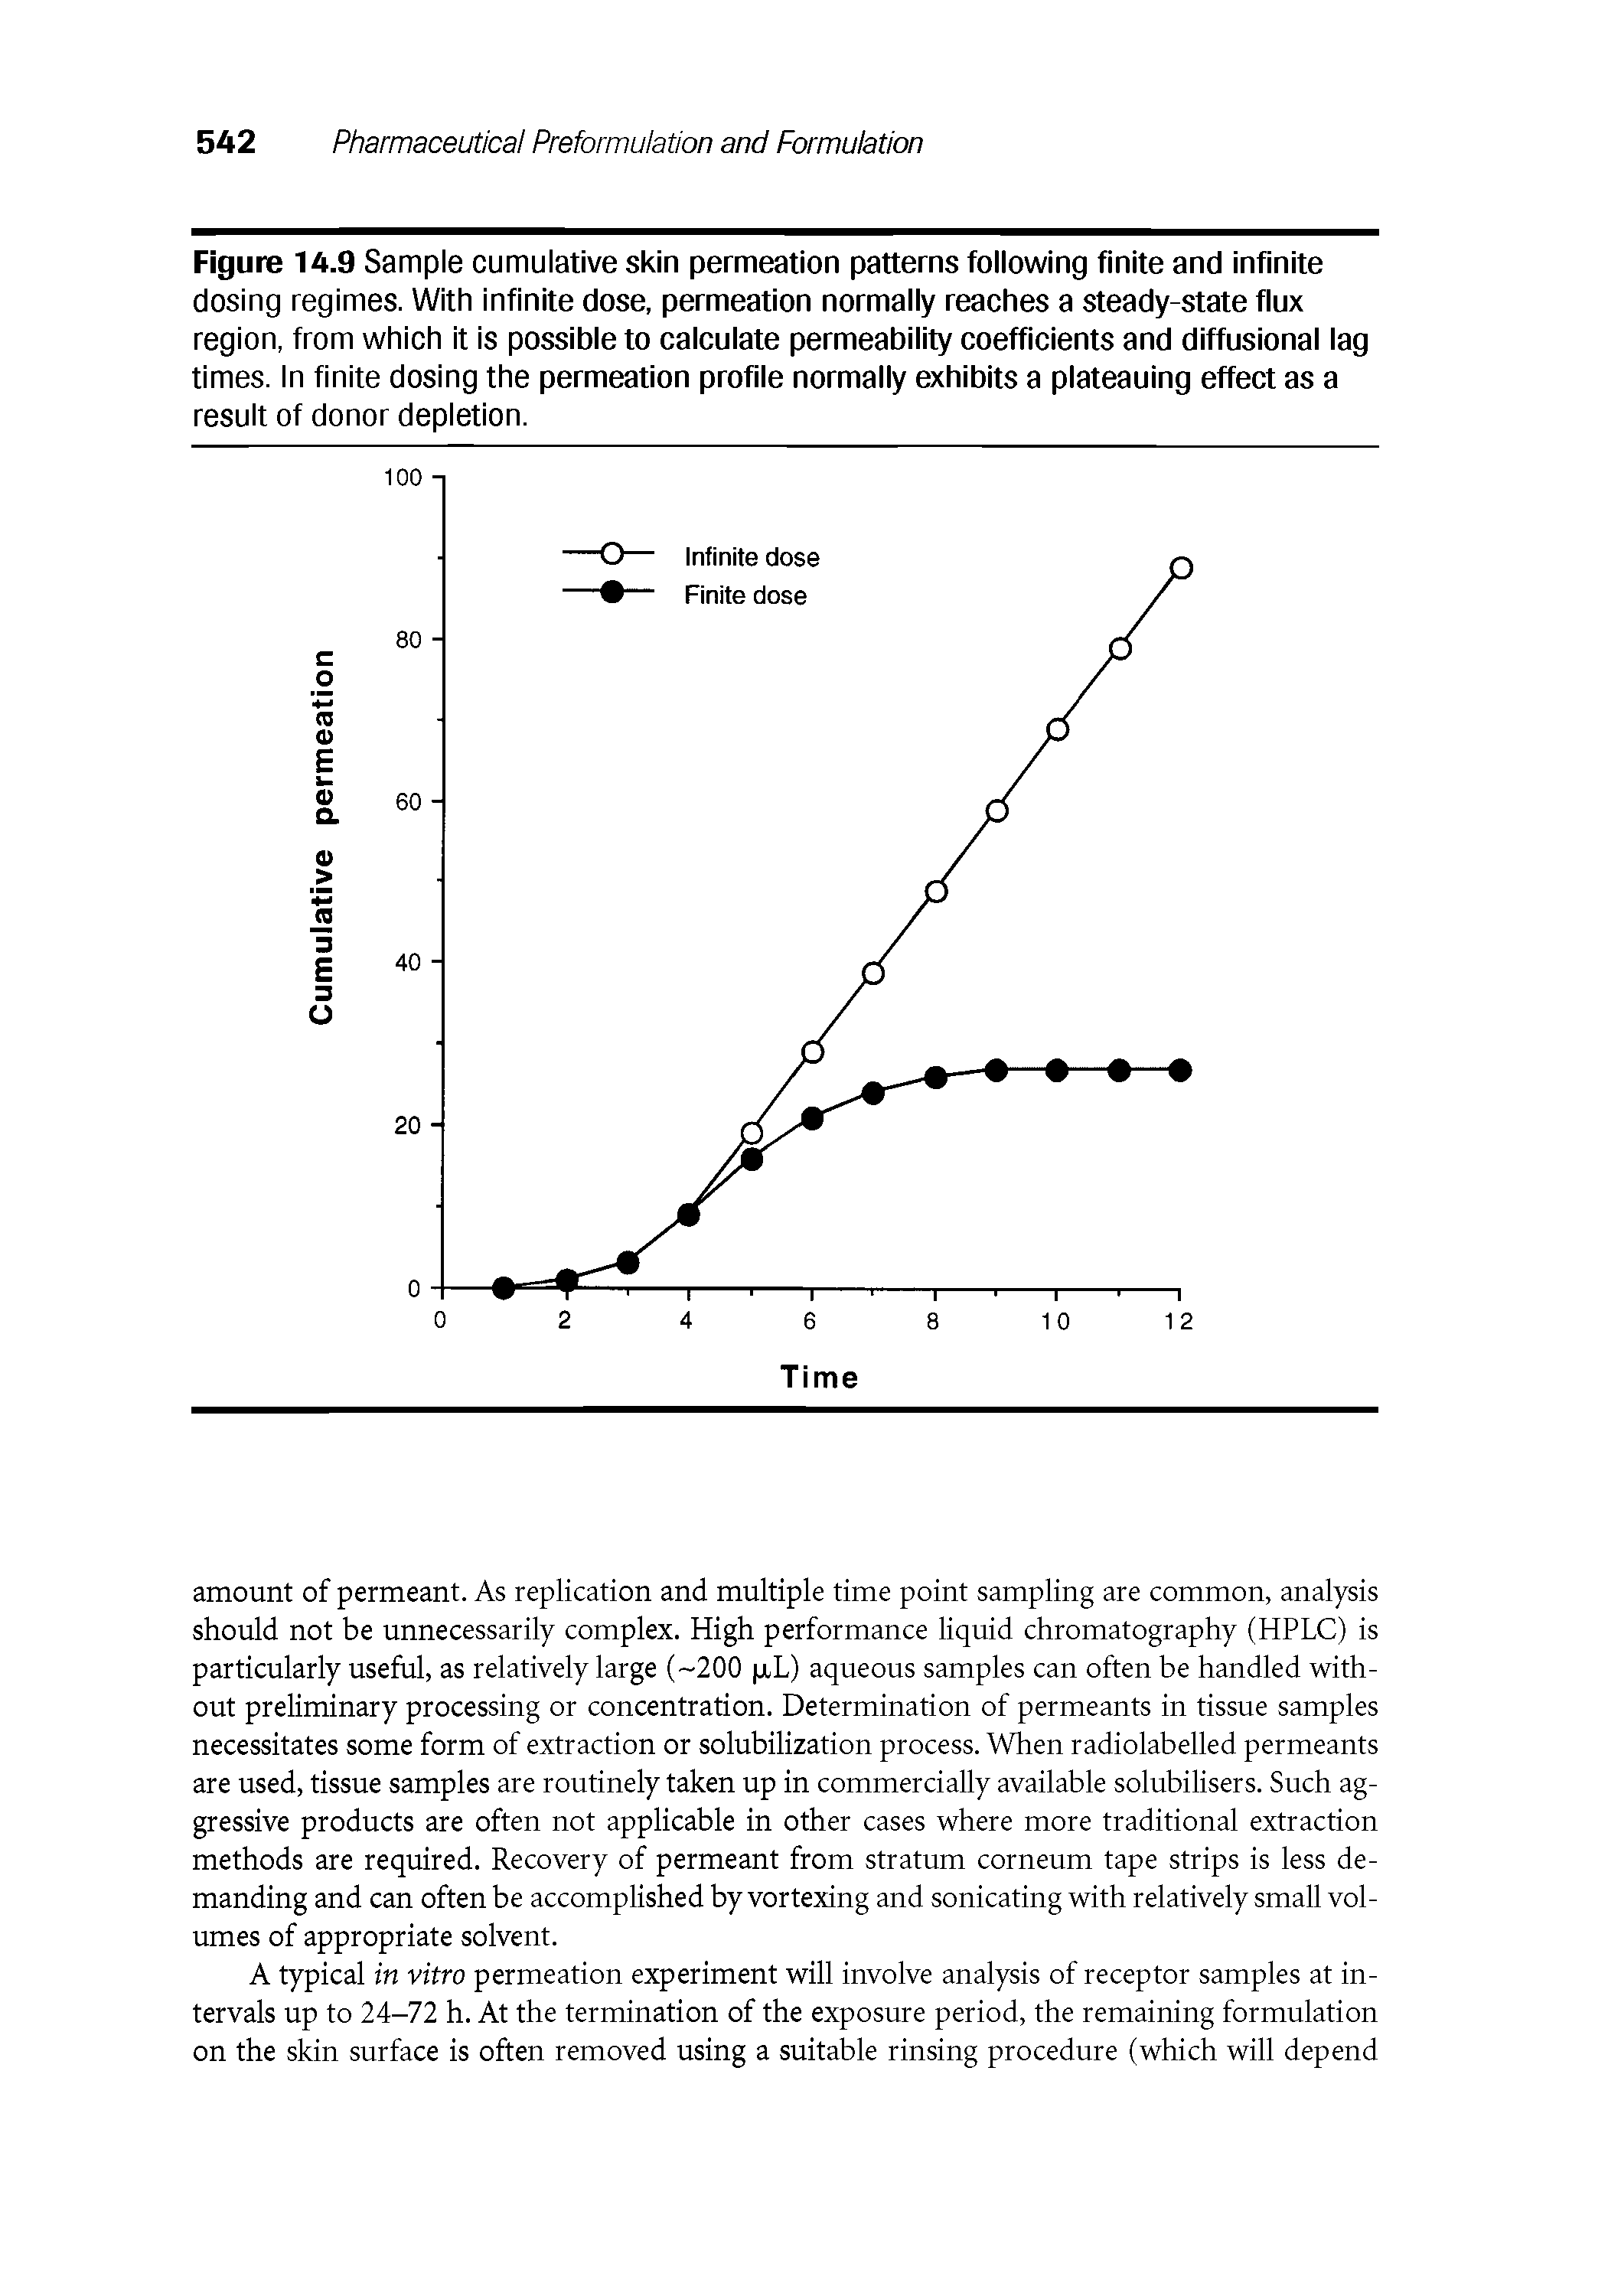 Figure 14.9 Sample cumulative skin permeation patterns following finite and infinite dosing regimes. With infinite dose, permeation normally reaches a steady-state flux region, from which it is possible to calculate permeability coefficients and diffusional lag times. In finite dosing the permeation profile normally exhibits a plateauing effect as a result of donor depletion.